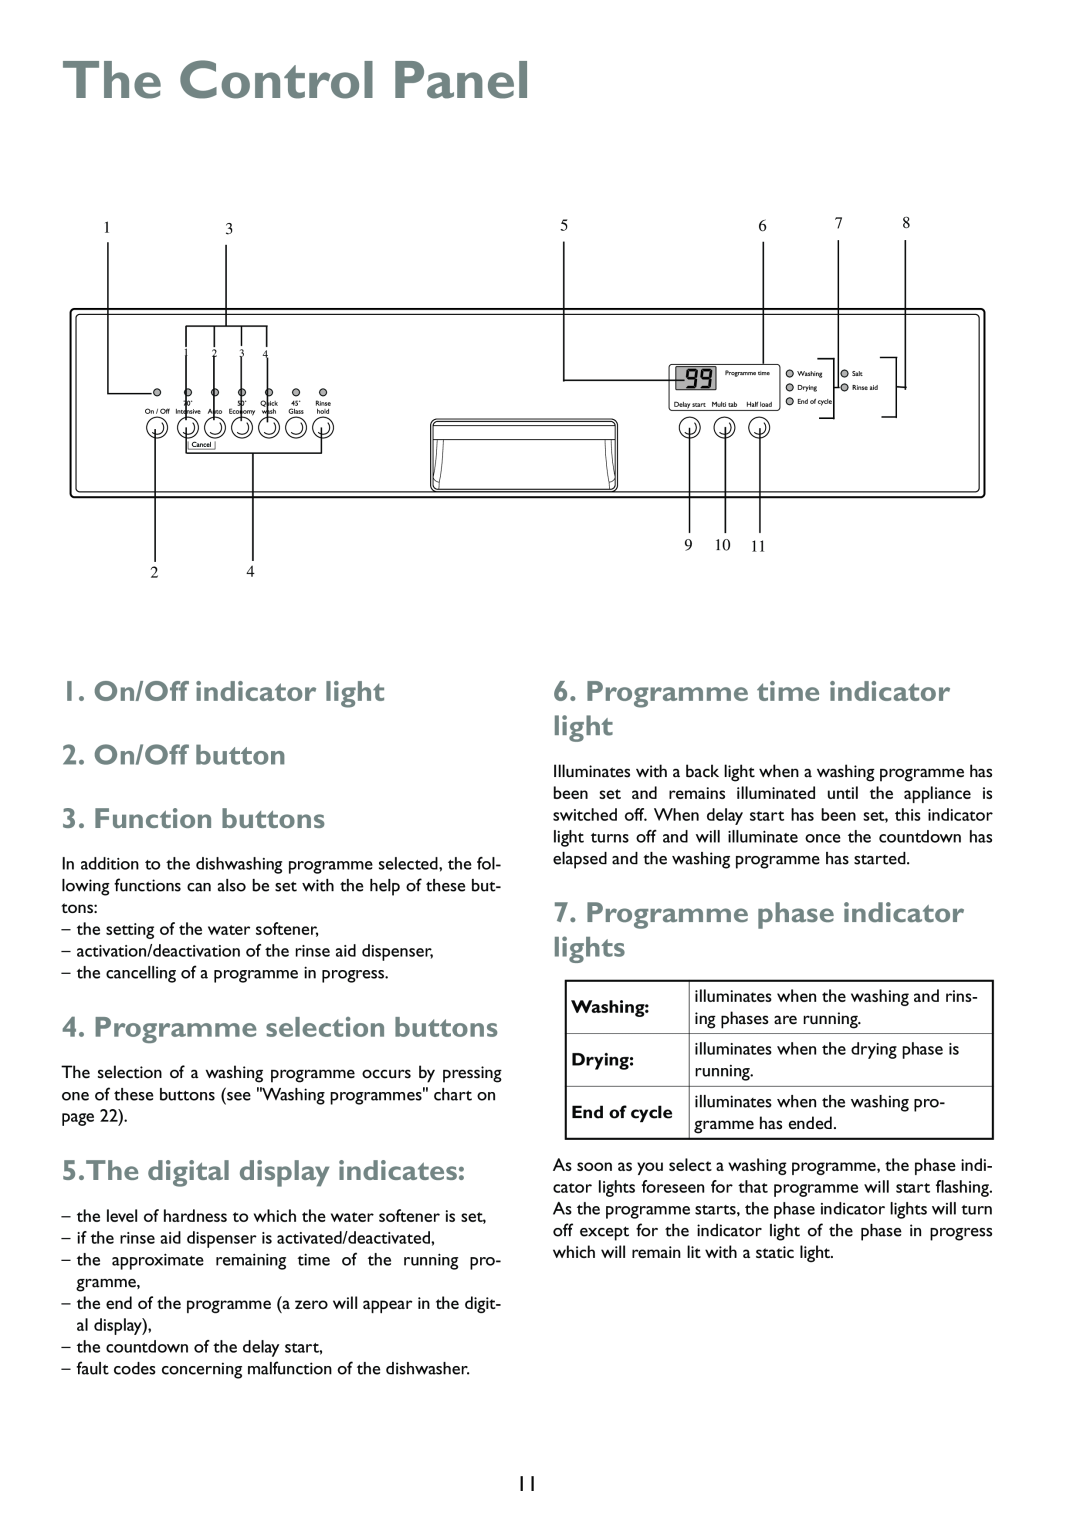 John Lewis JLDWW 1203 instruction manual The Control Panel, 1.On/Off indicator light 2.On/Off button, Function buttons 